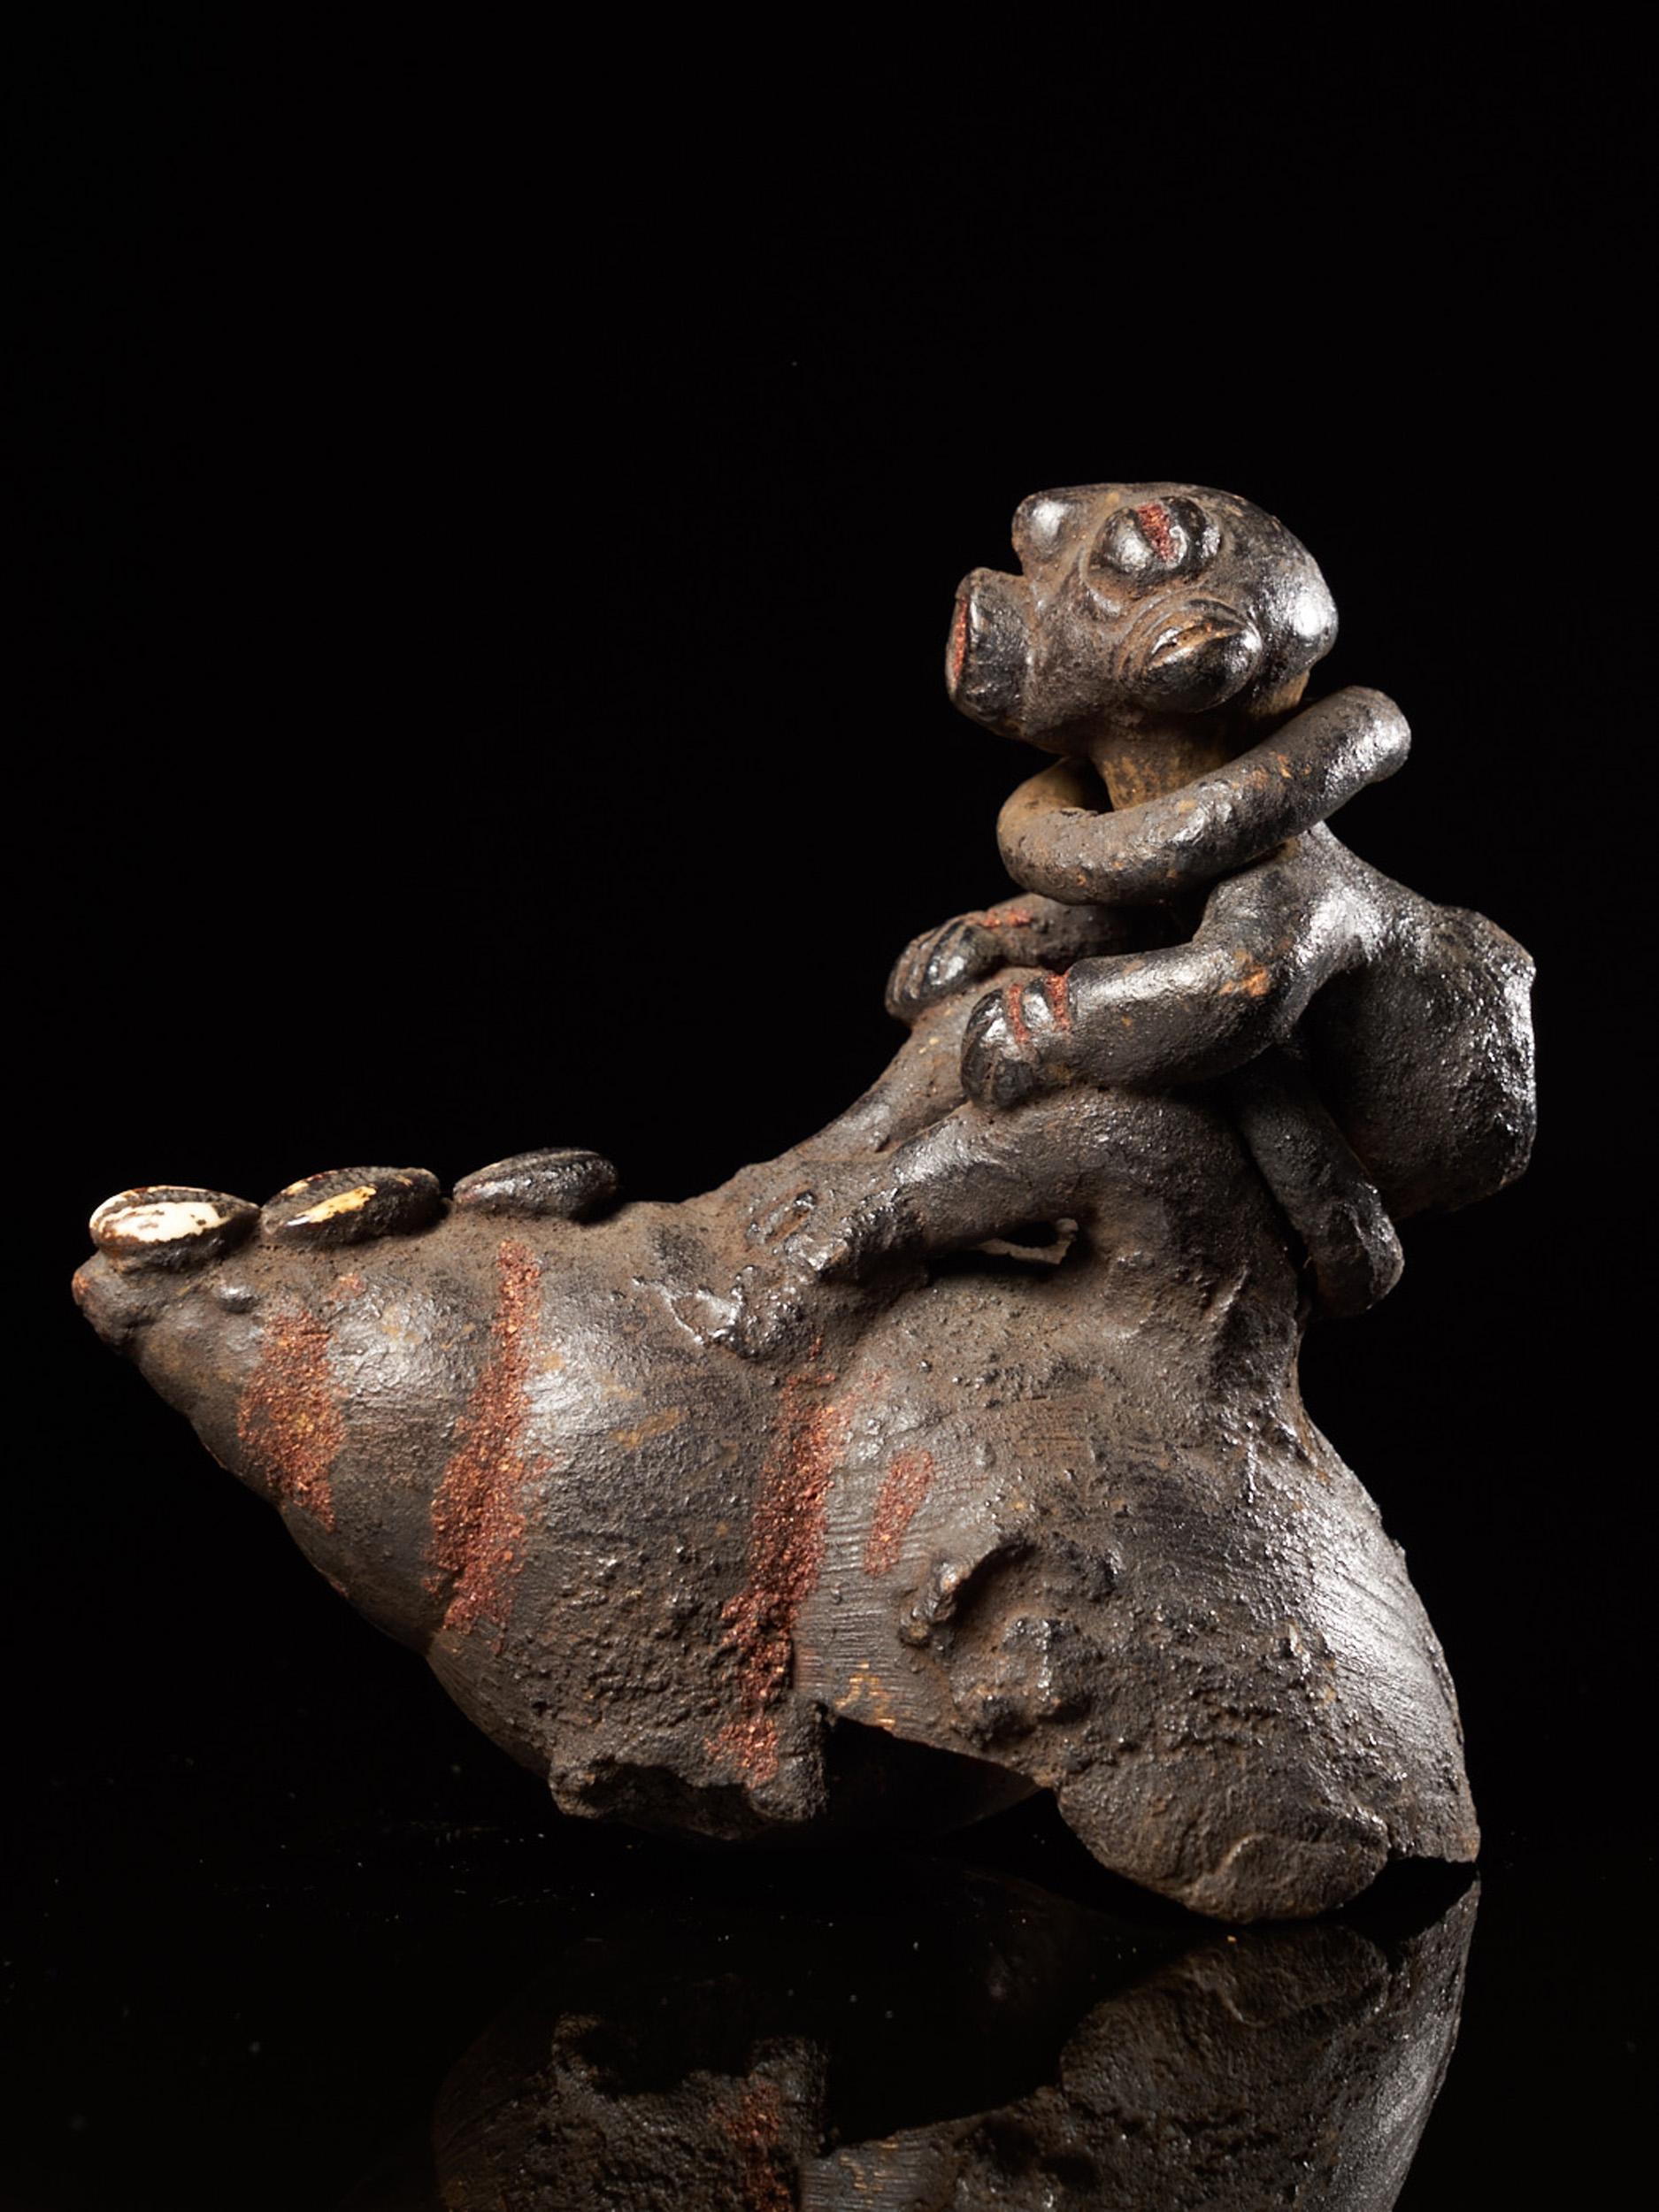 20th Century Ceremonial Monkey Figure on a Snailshell, Old German Collection, Bulu People